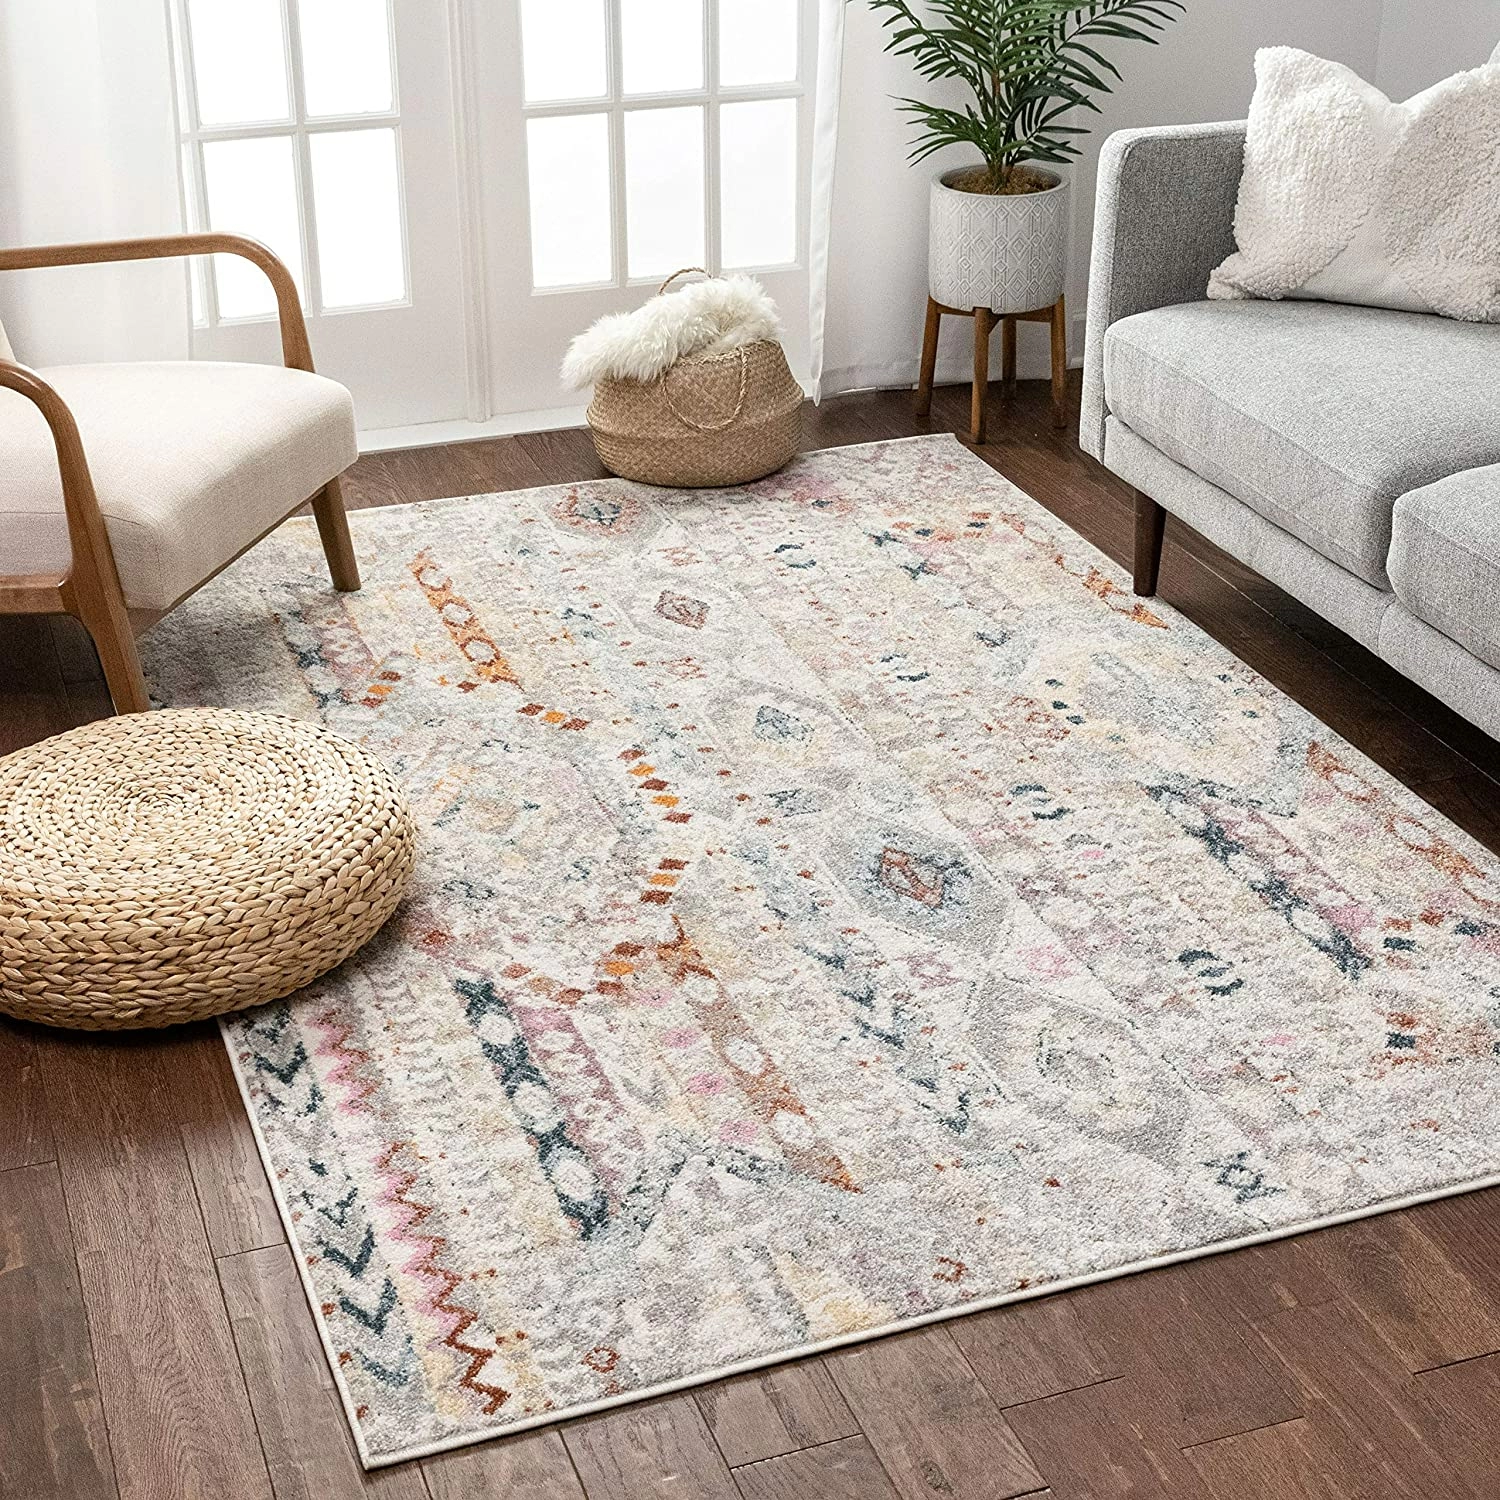 Best Farmhouse Rugs Guide All Areas And Stylish Decor 2020